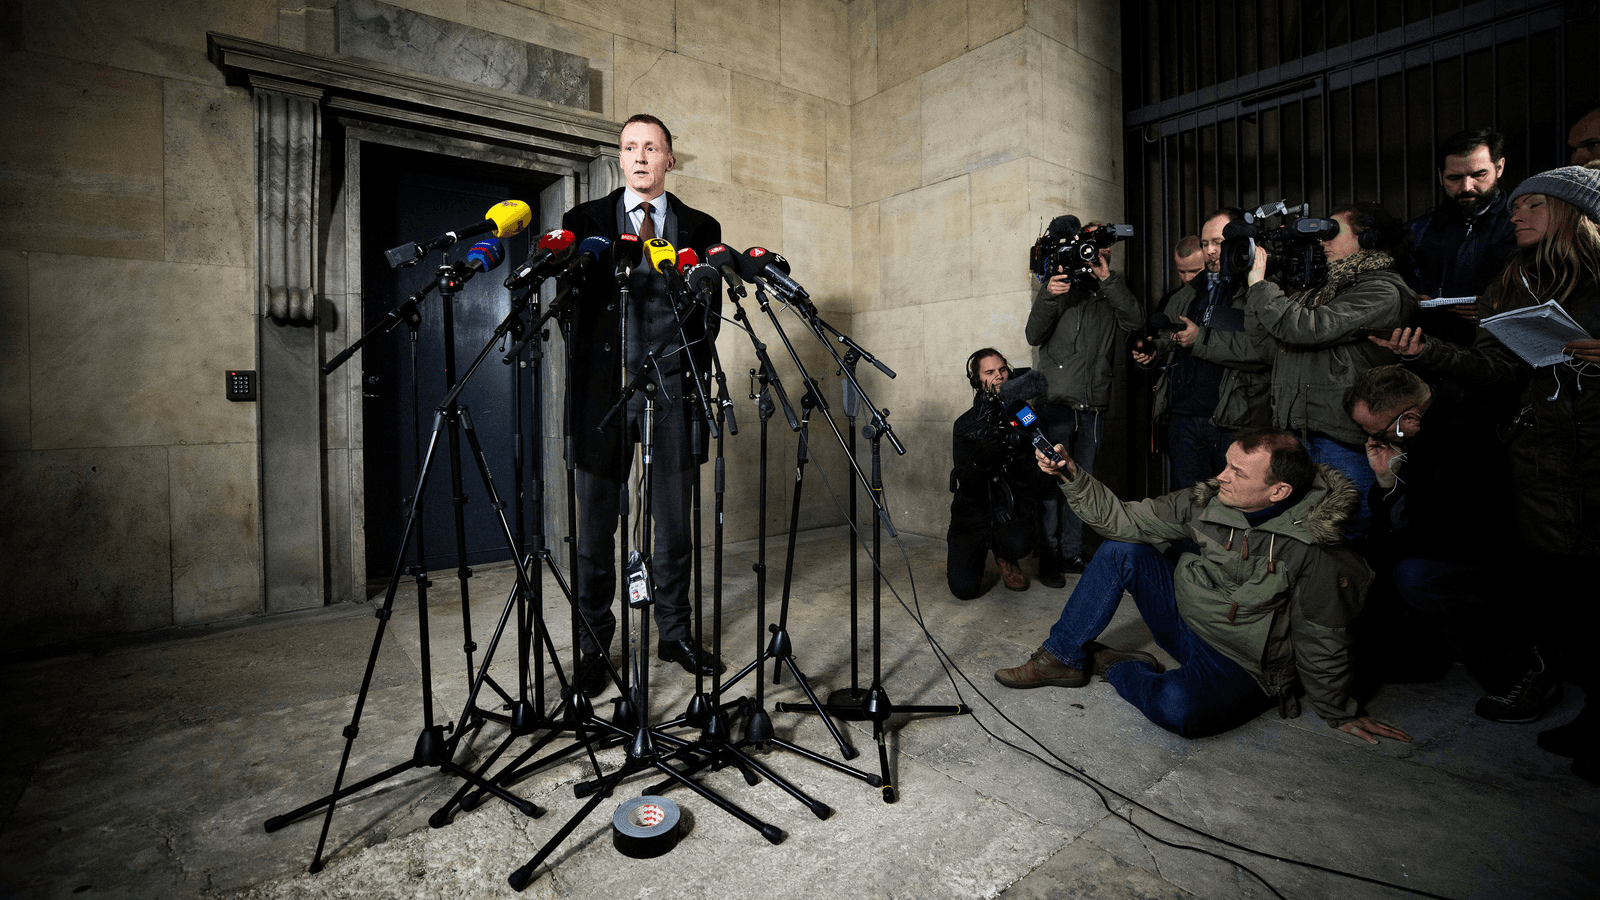 Copenhagen Police's Special prosecutor Jakob Buch-Jepsen is seen during a news conference in front of the Copenhagen Police Headquarters after the prosecutor's office announced the charge in the submarine murder case against Peter Madsen, in Copenhagen